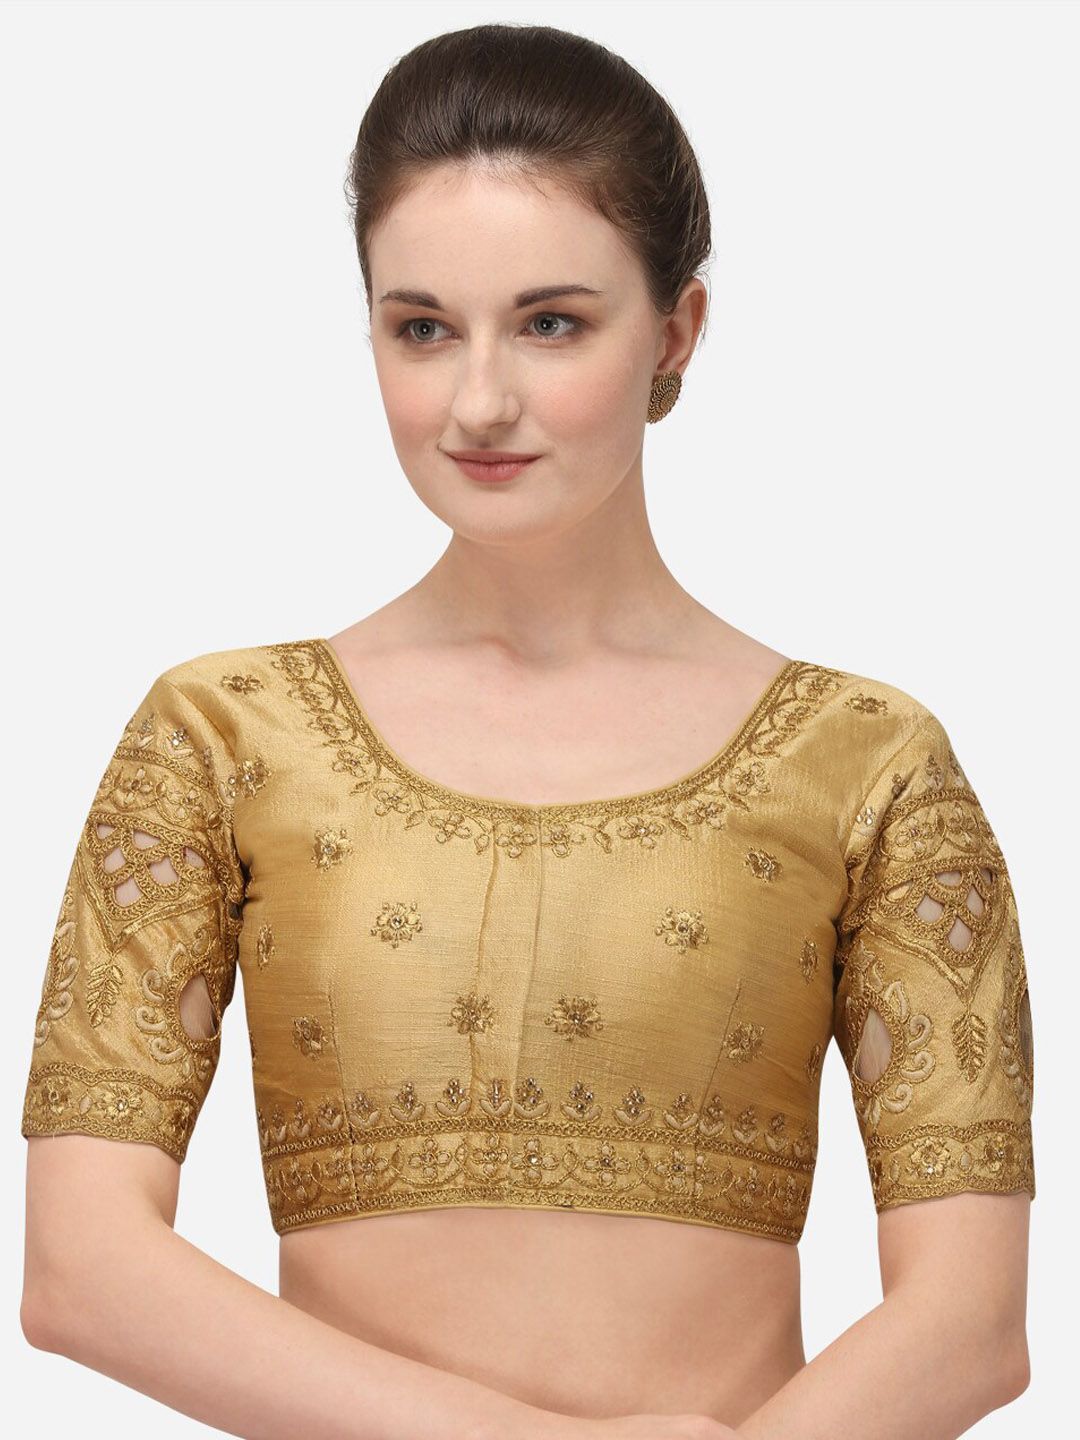 Amrutam Fab Beige & Gold-Coloured Embroidered Silk Saree Blouse Price in India